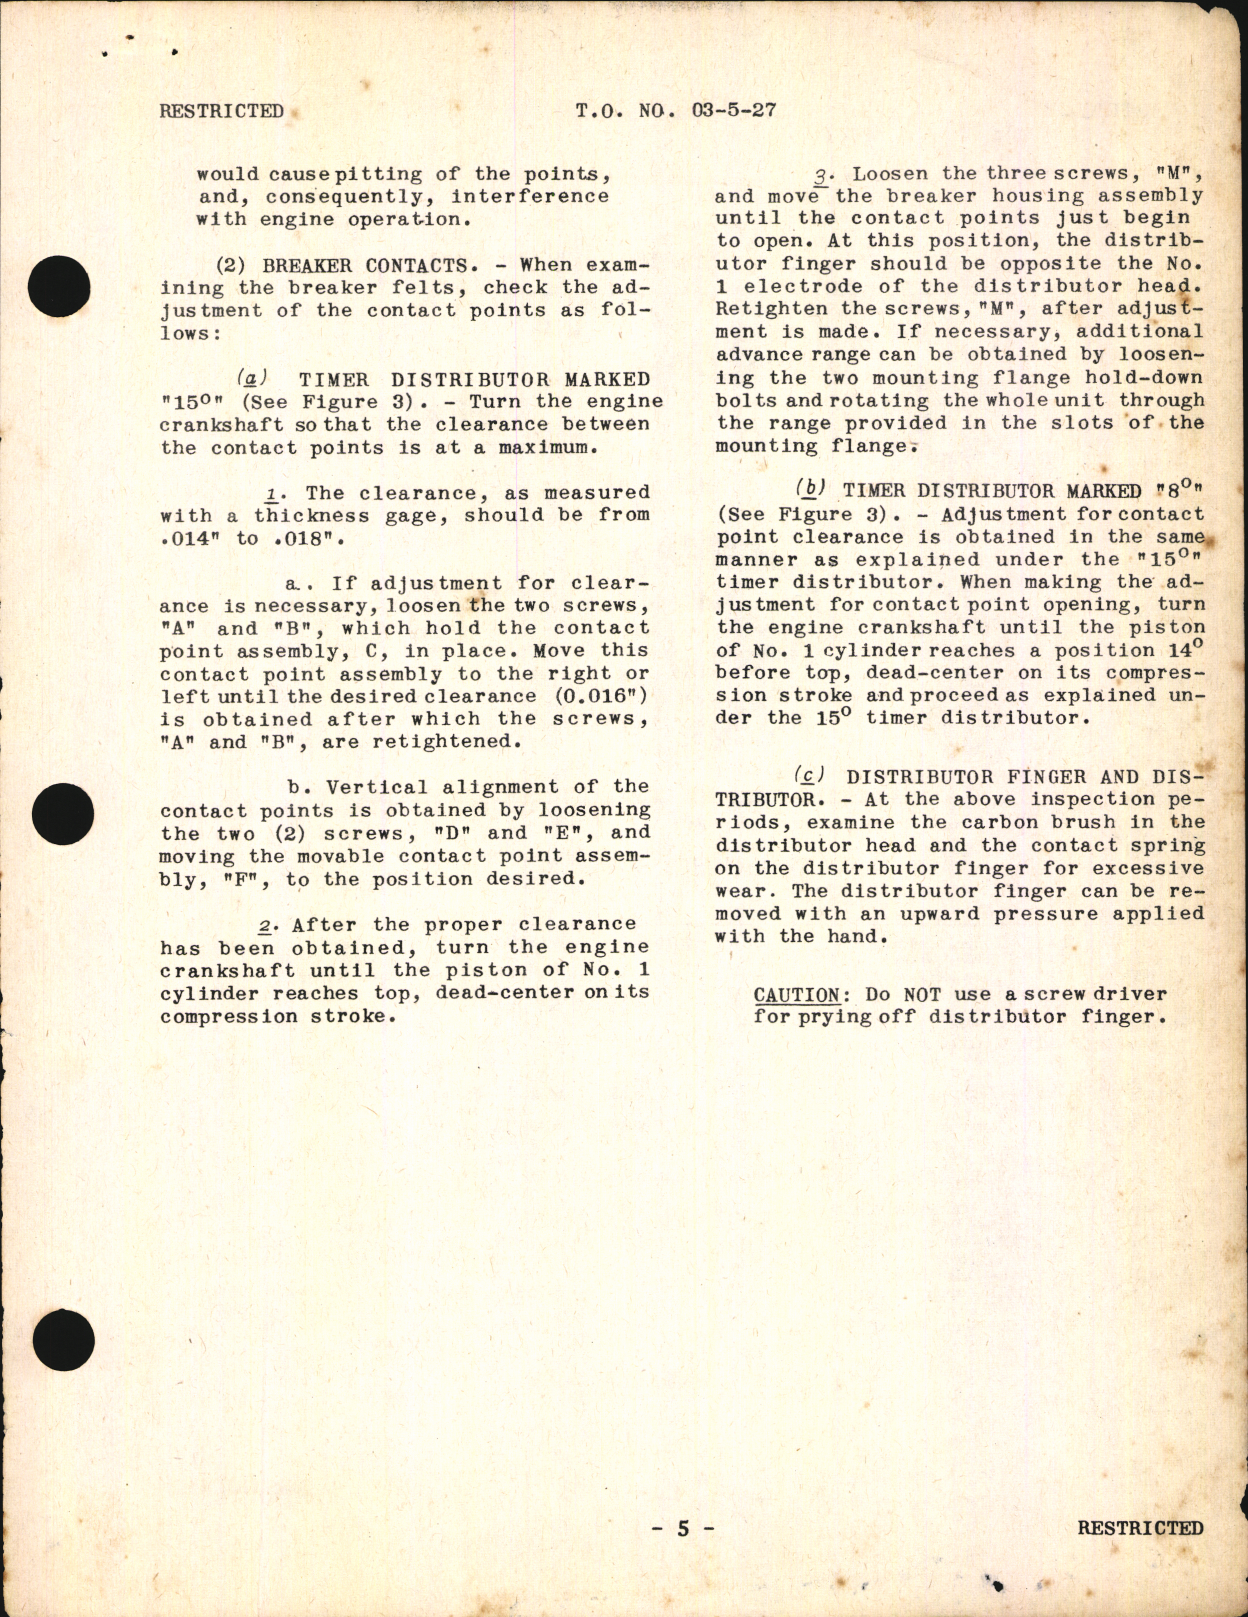 Sample page 7 from AirCorps Library document: Handbook of Service and Operation Instructions with Parts List for Battery Ignition Type WL-7A (For Jacobs Engines)